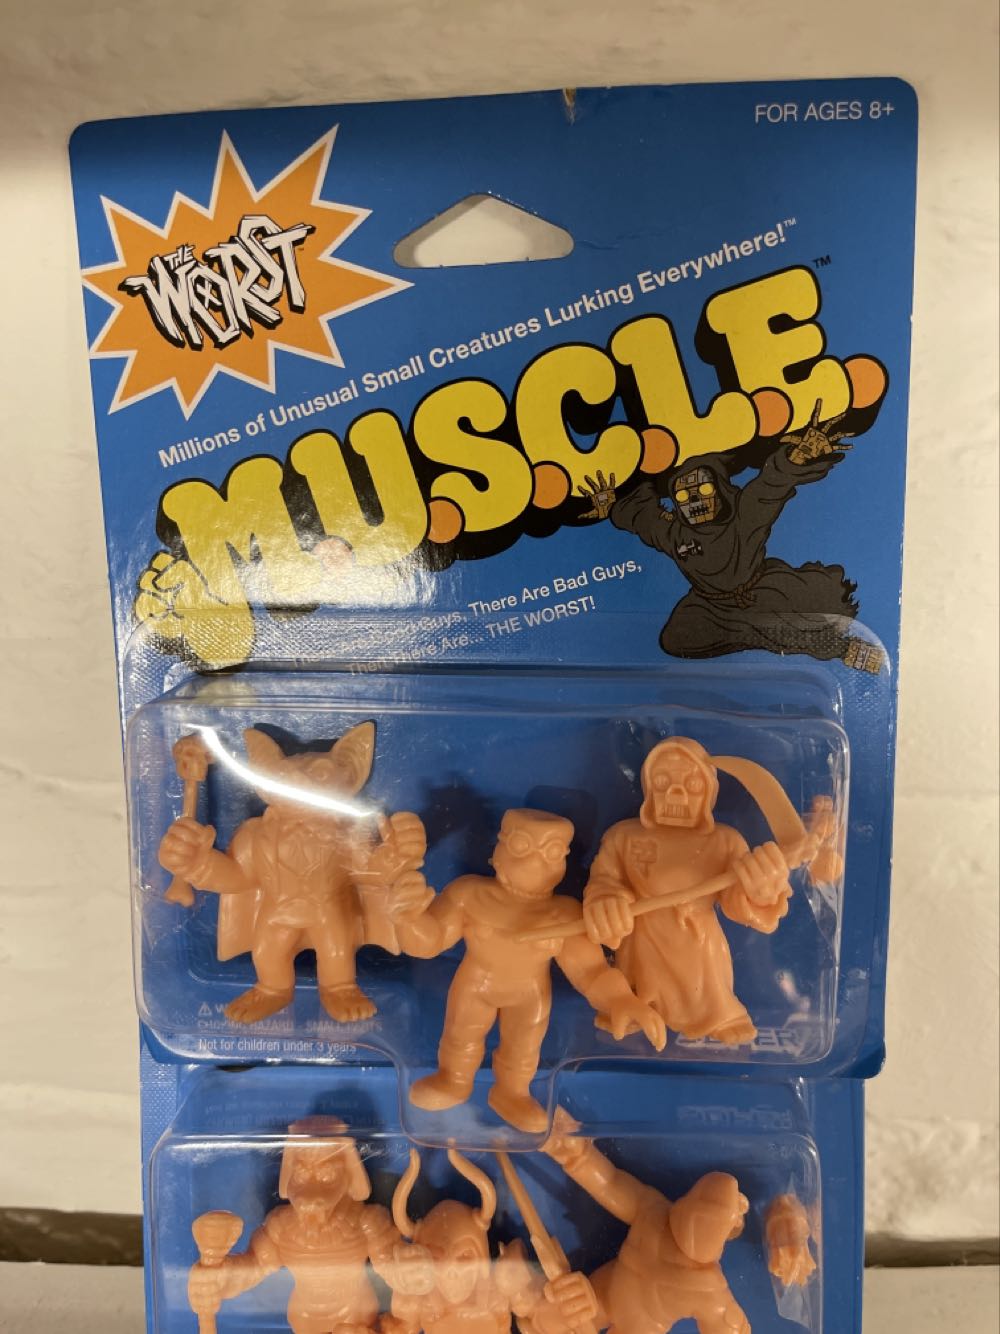 The Worst MUSCLE Pink - Super 7 action figure collectible [Barcode 811169033903] - Main Image 1